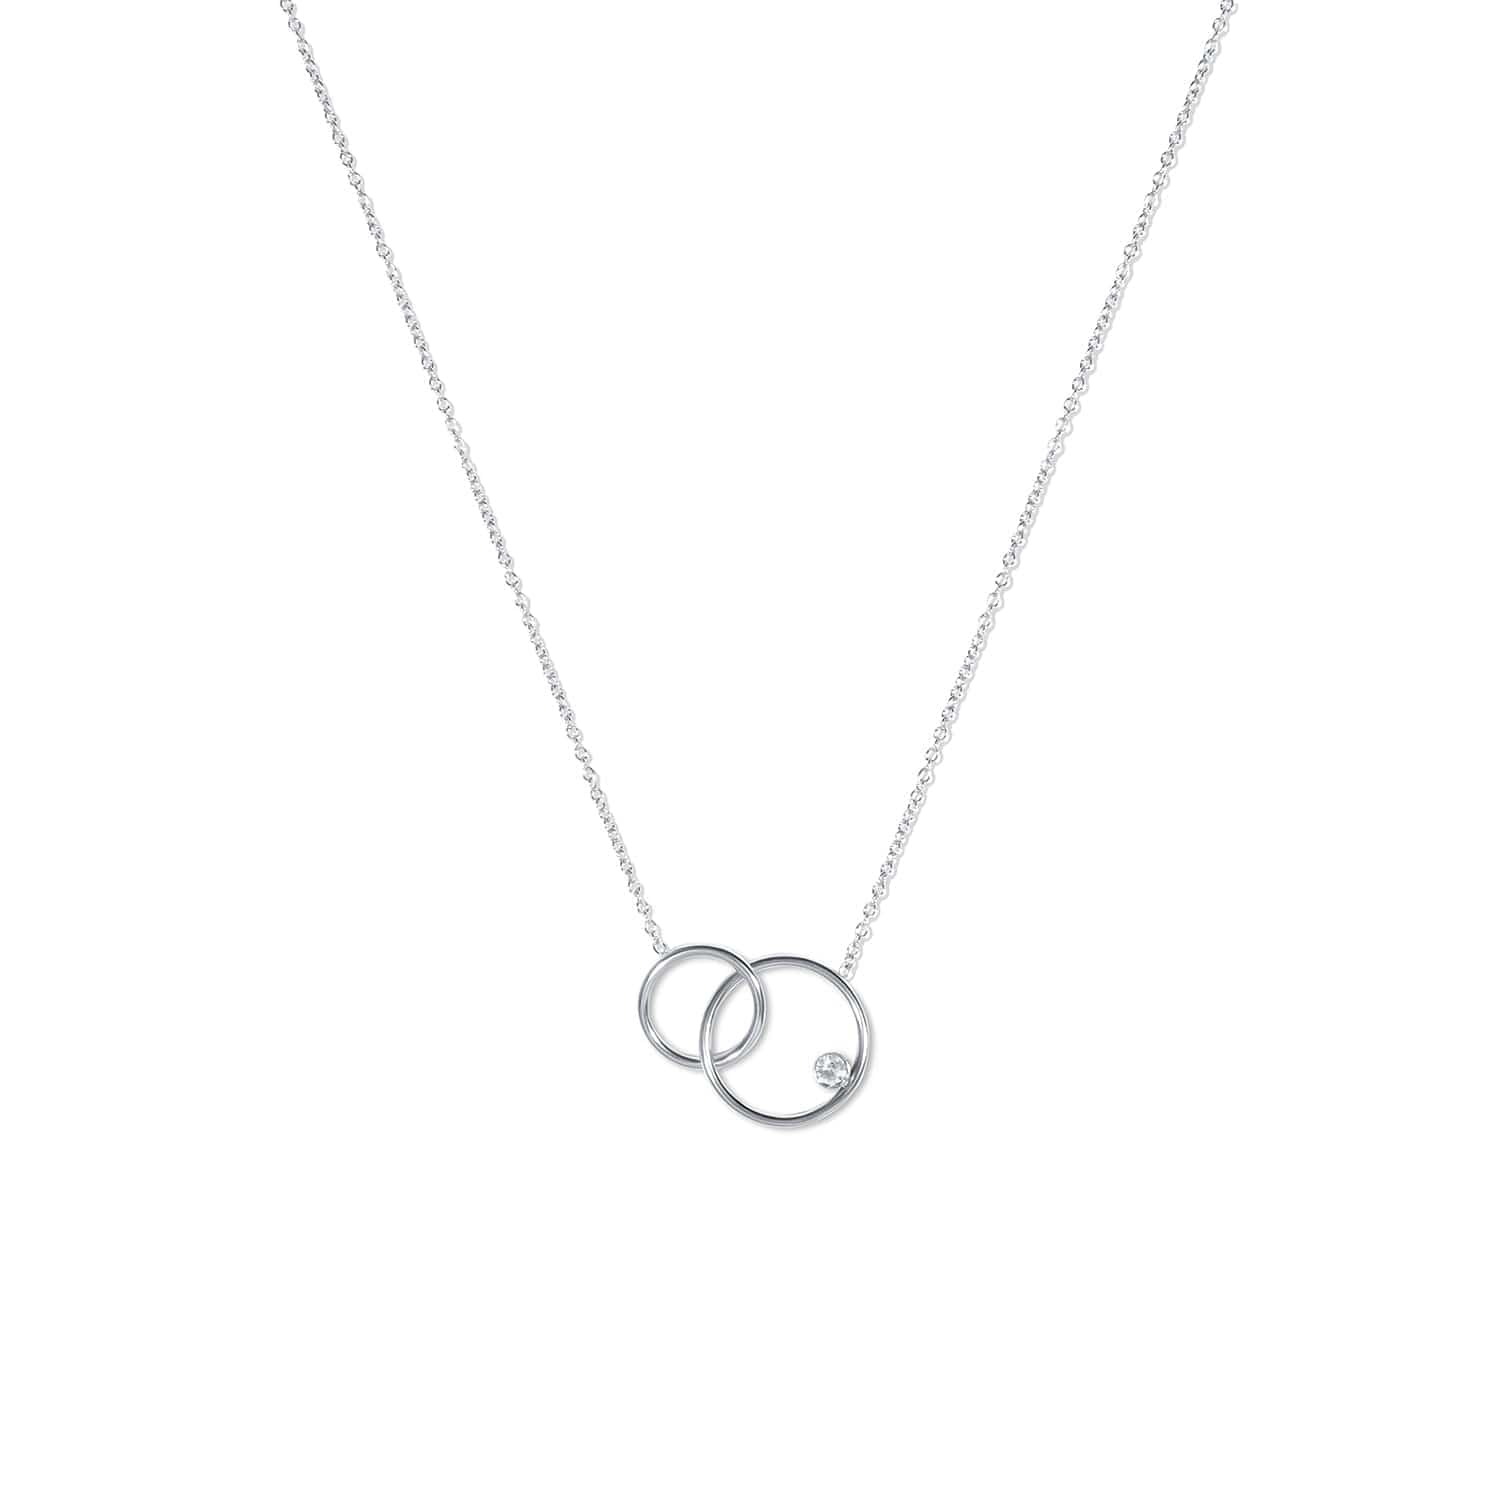 Twilight London Layering Necklace Silver Infinity Hoops Necklace